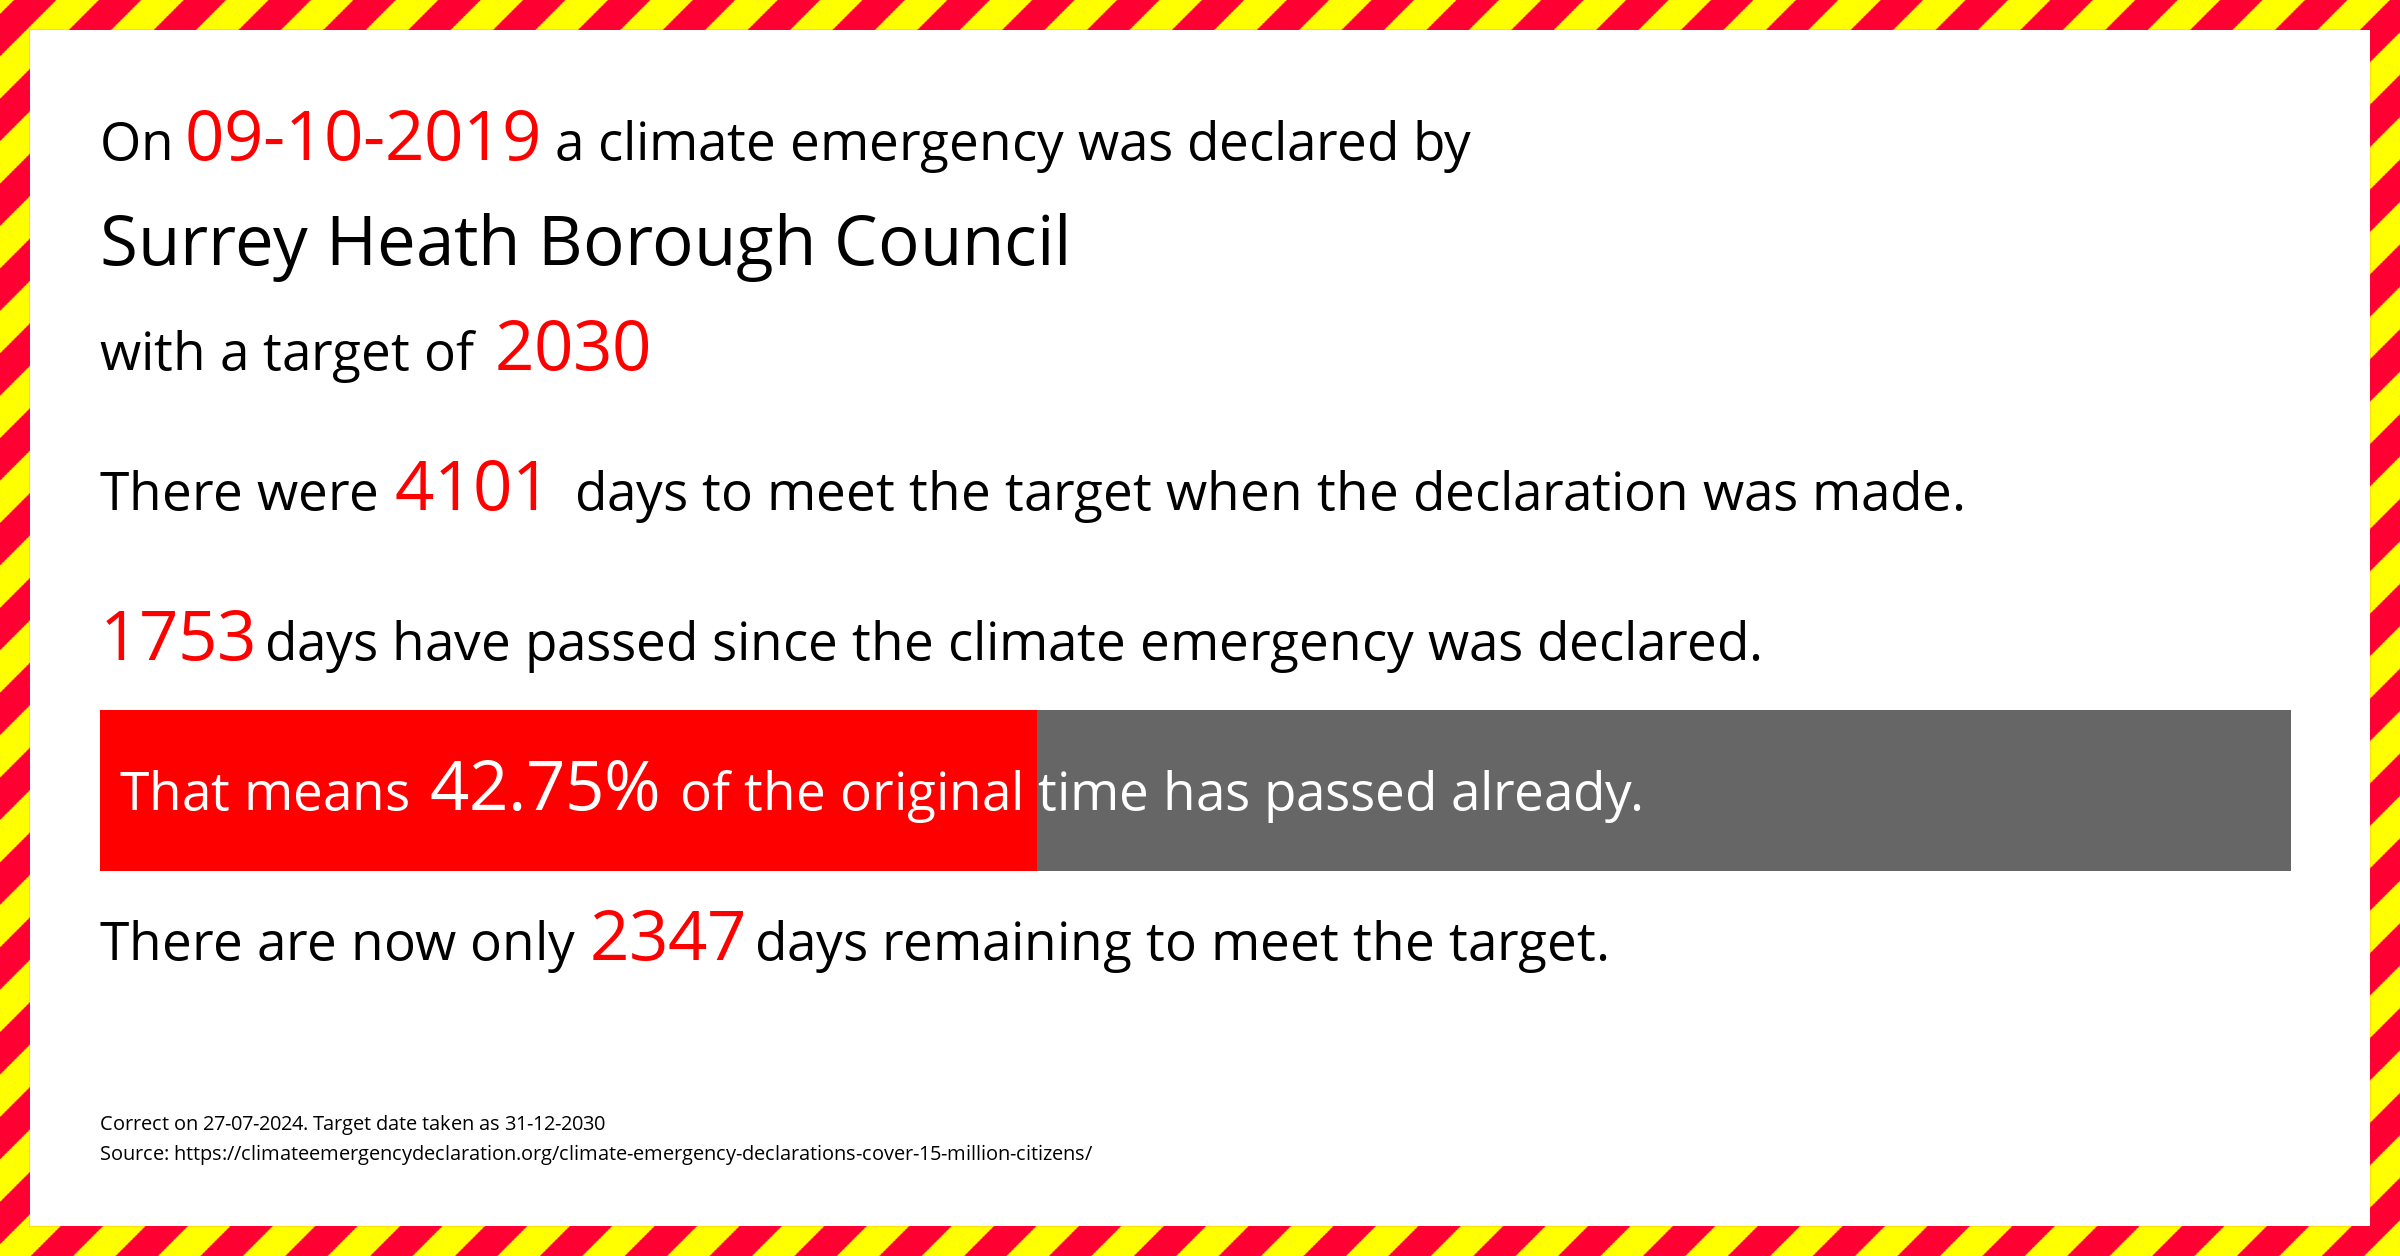 Surrey Heath Borough Council declared a Climate emergency on Wednesday 9th October 2019, with a target of 2030.